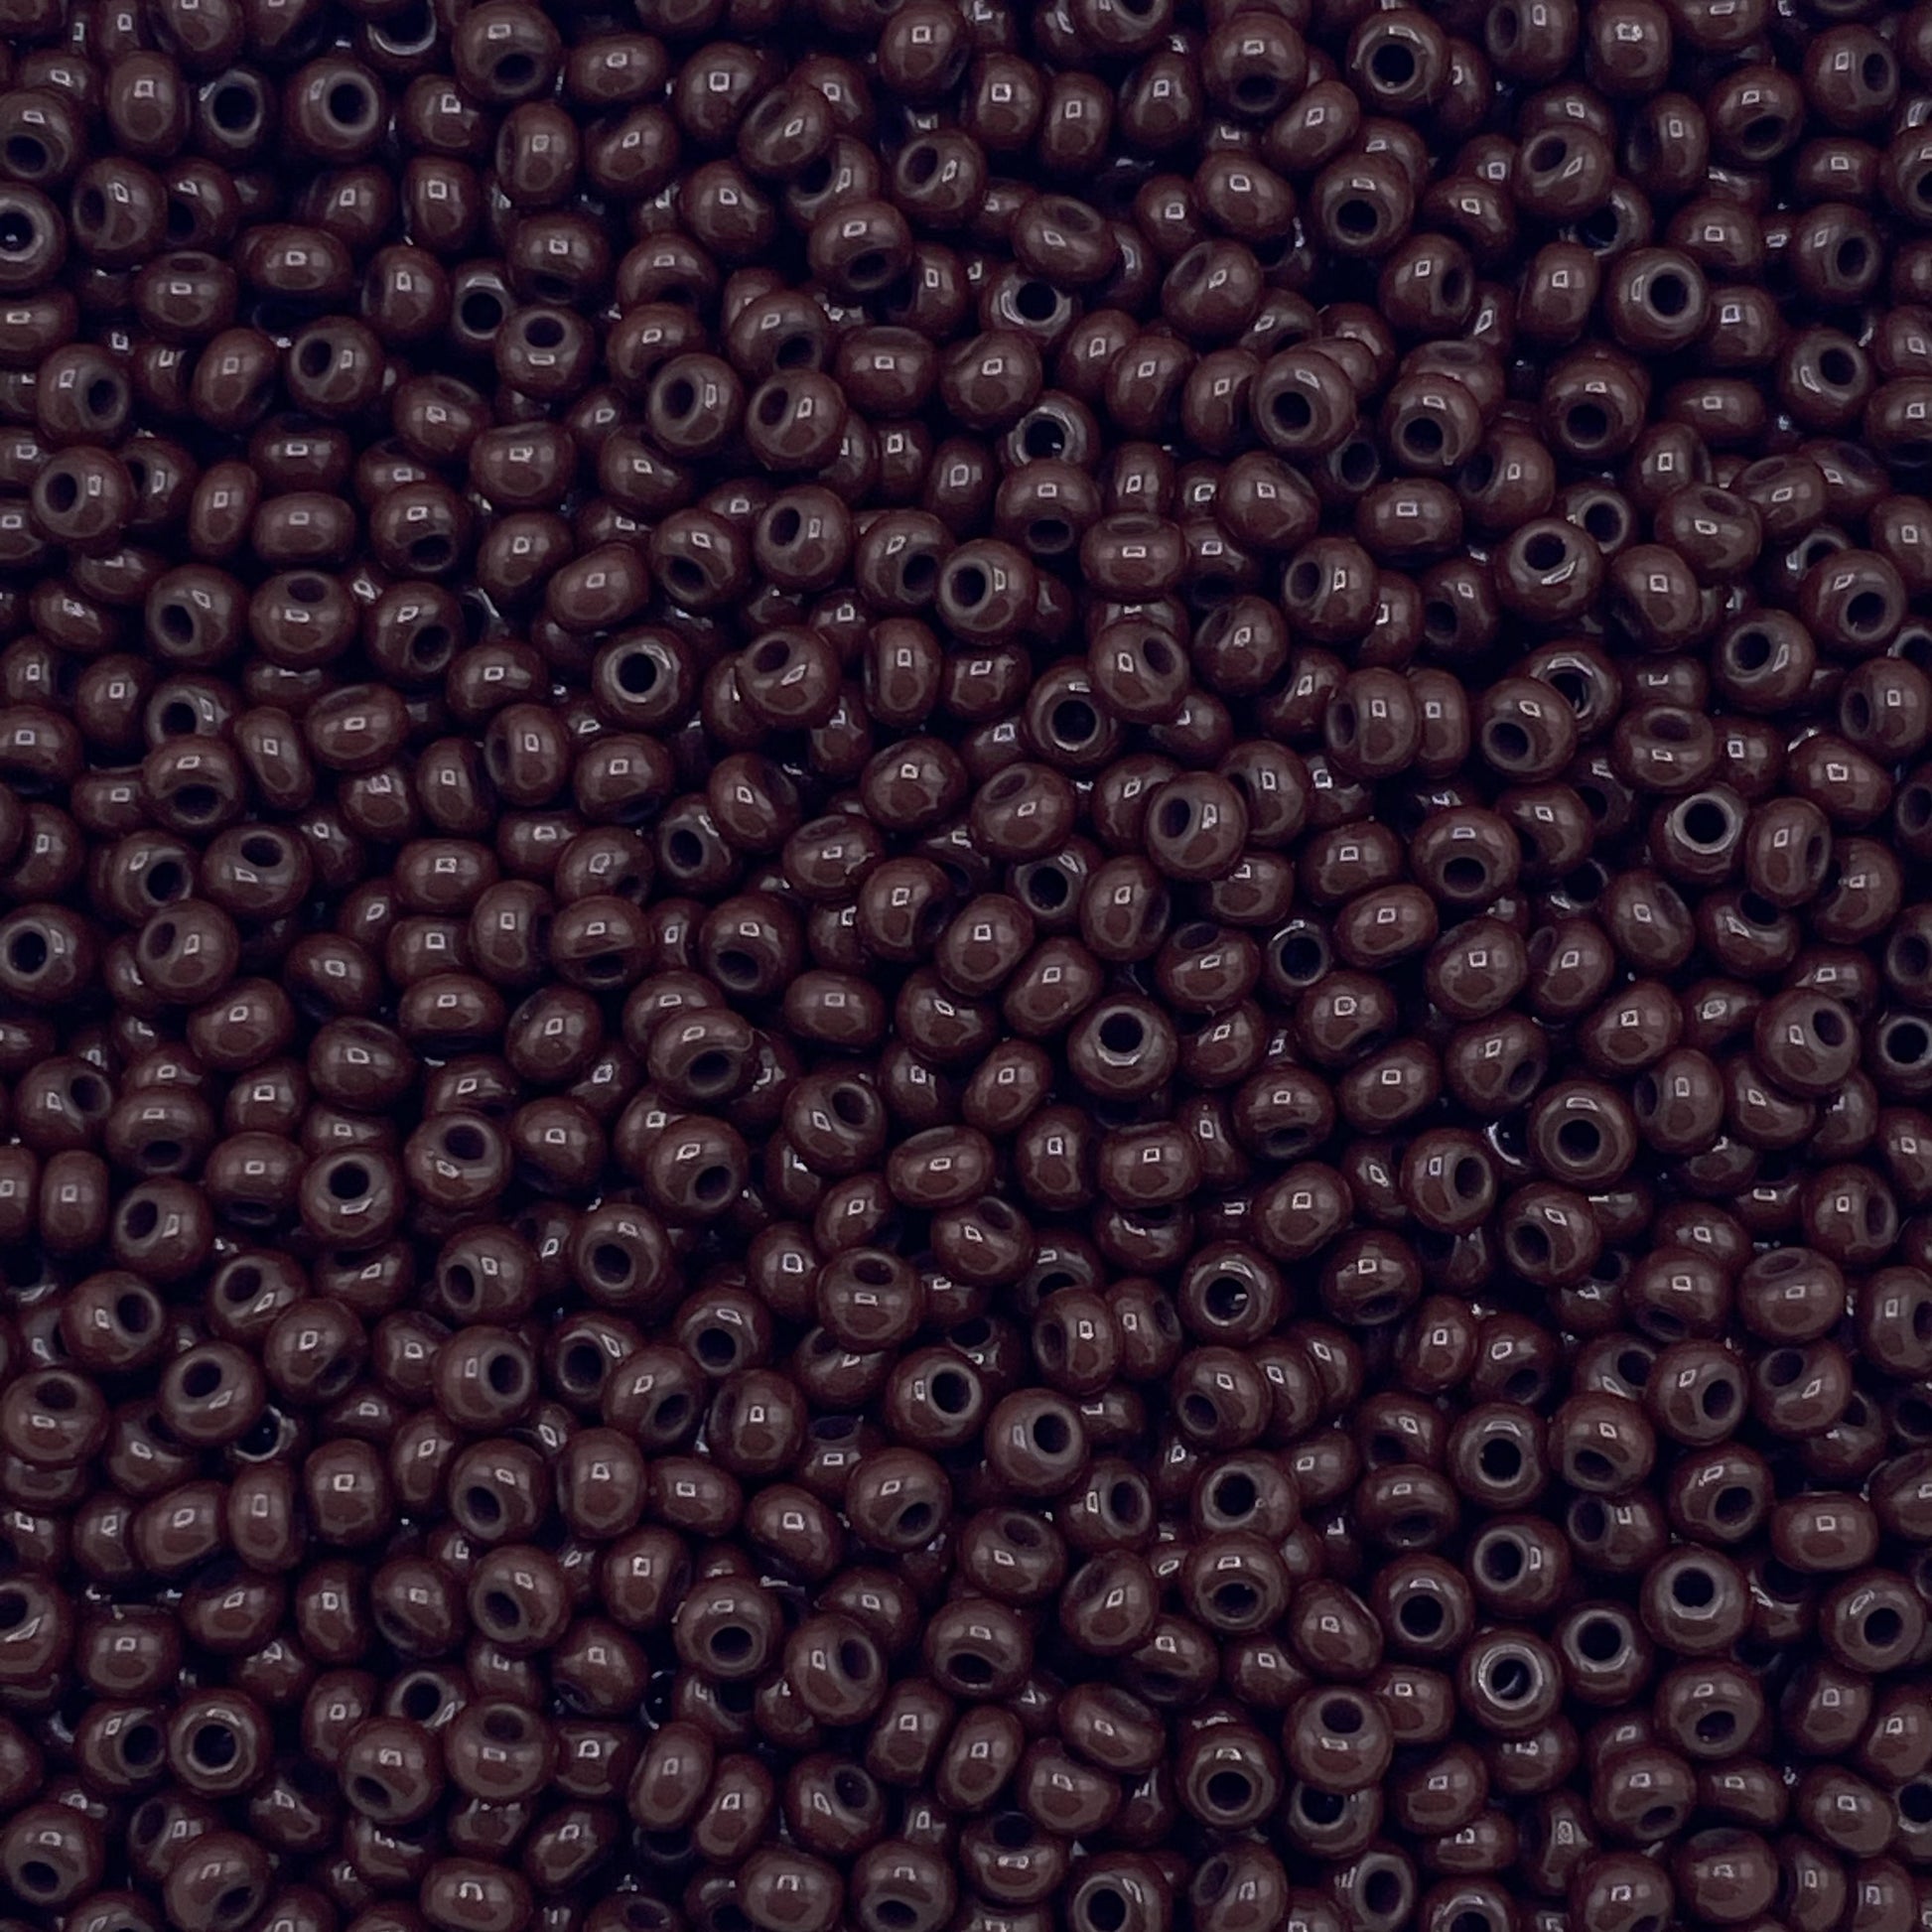 Beads - Solid - Brown